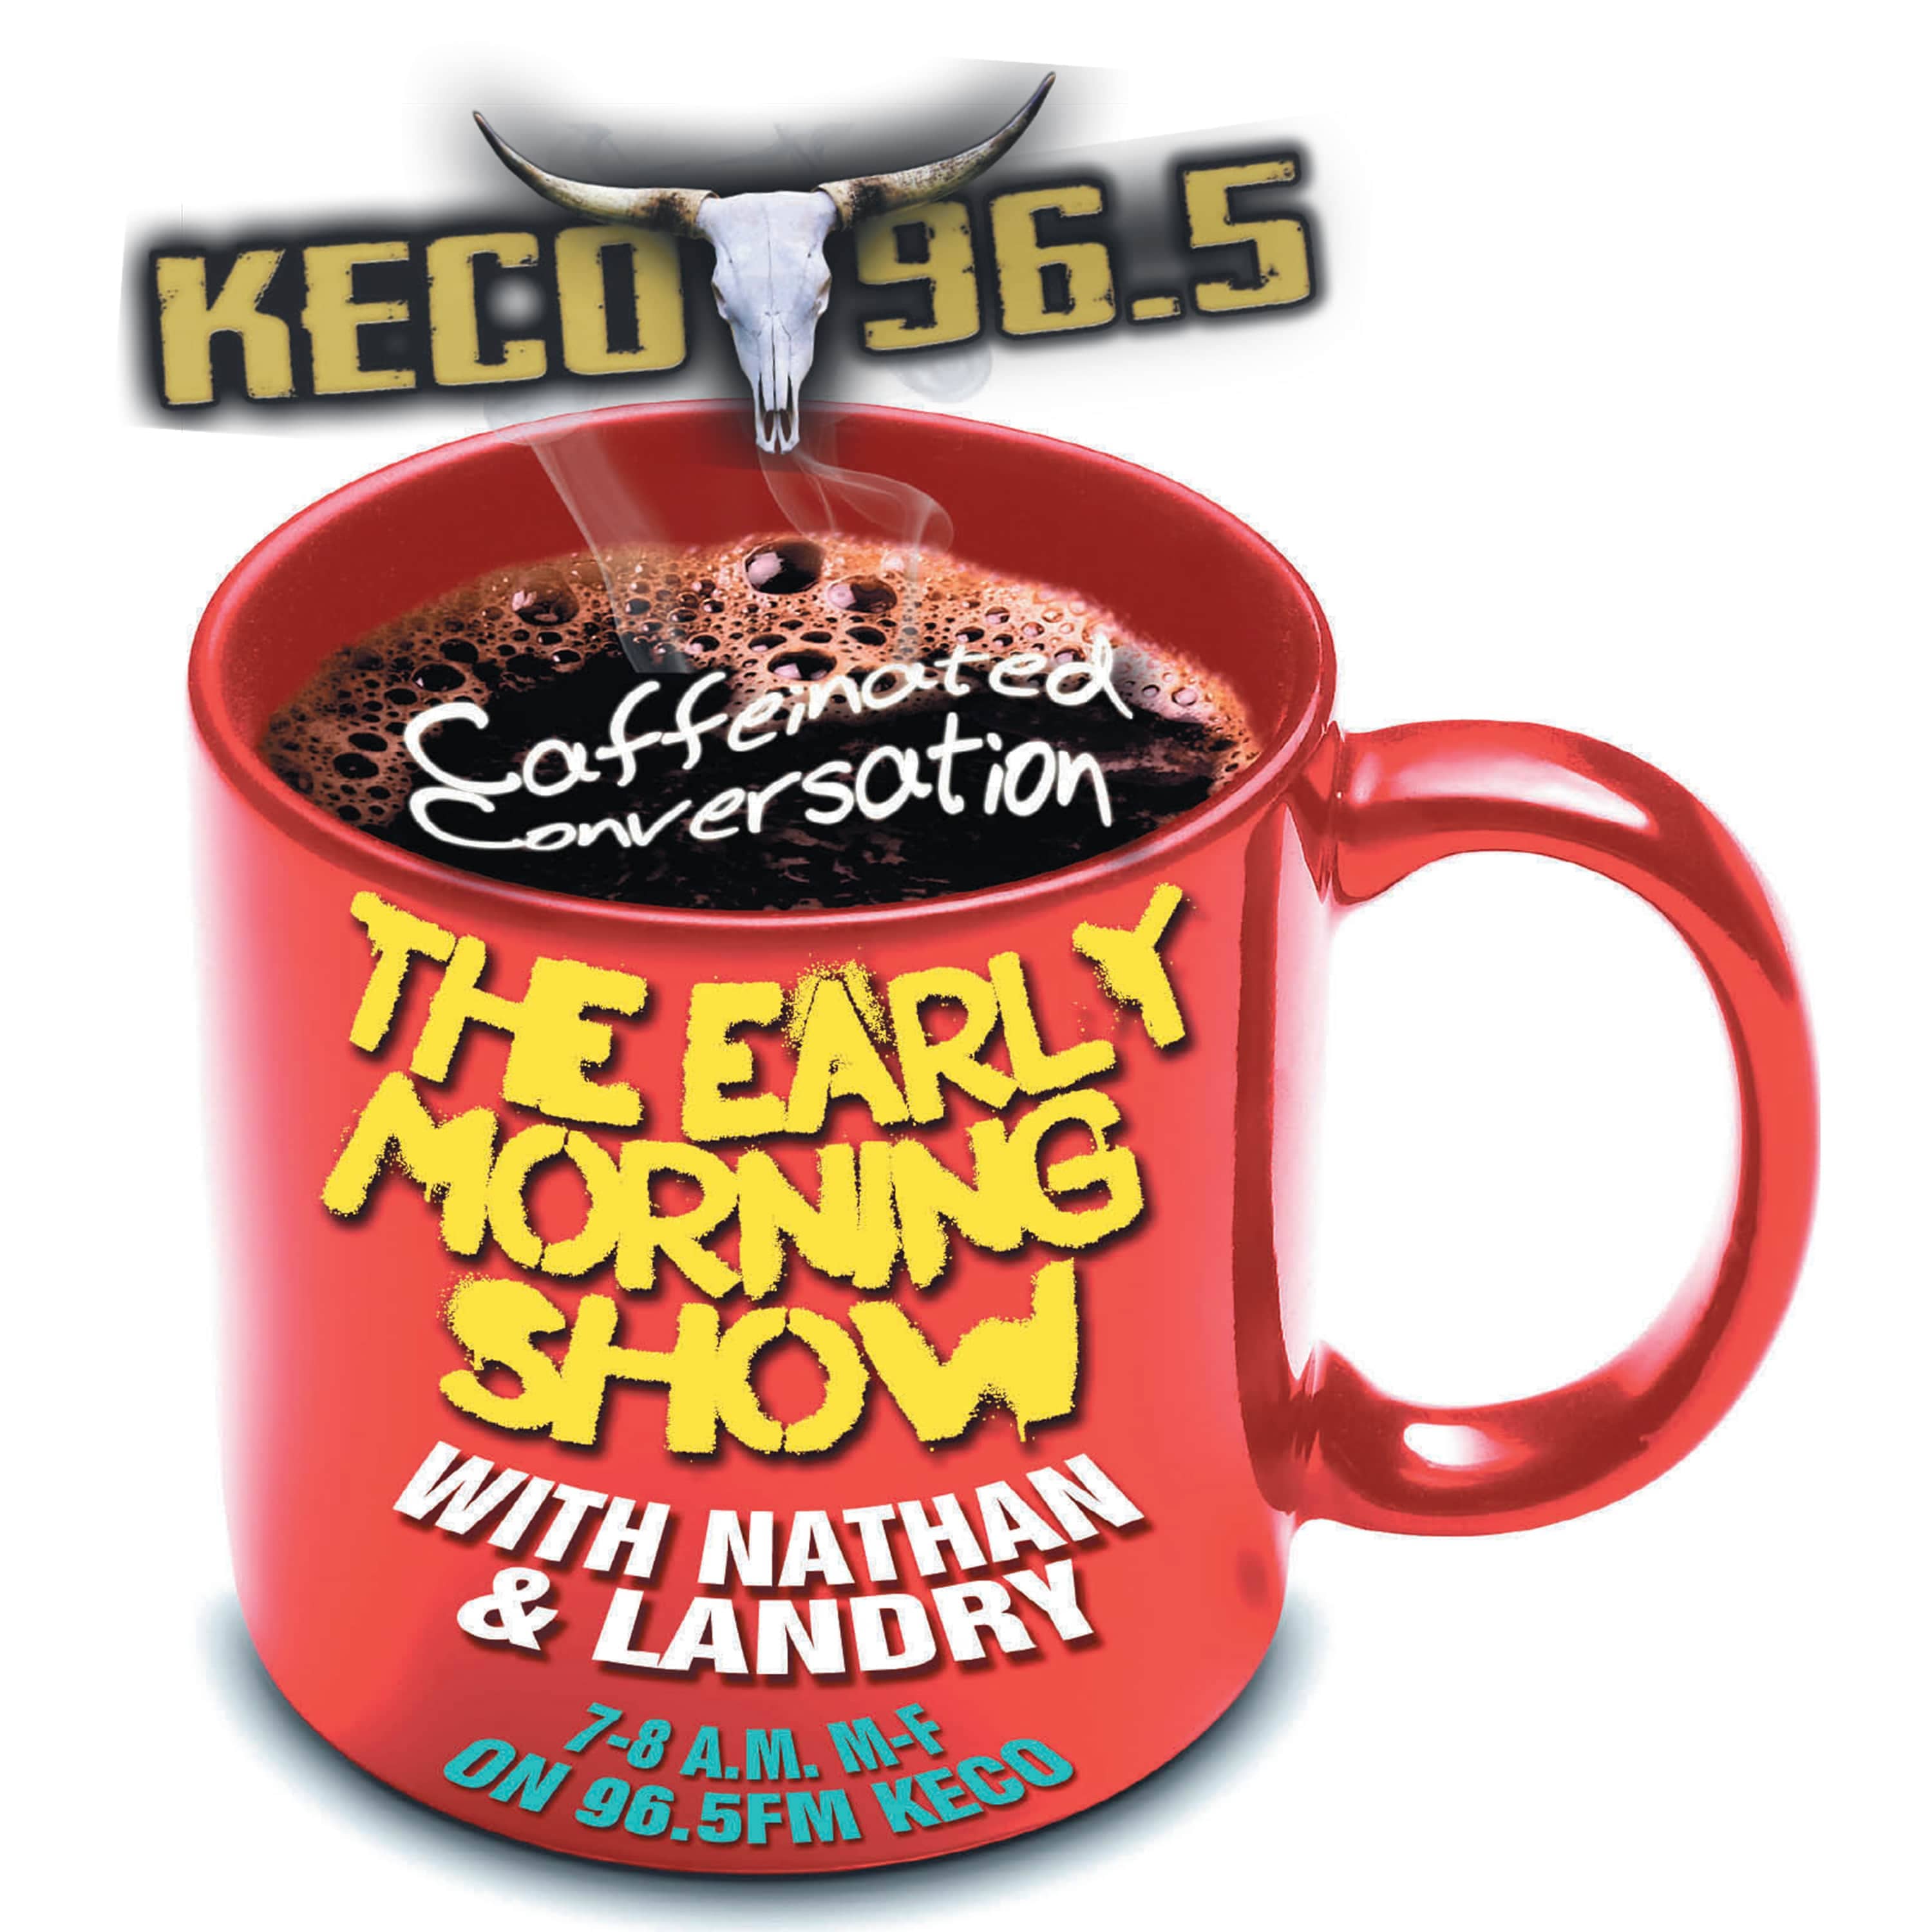 The Early Morning Show podcast logo